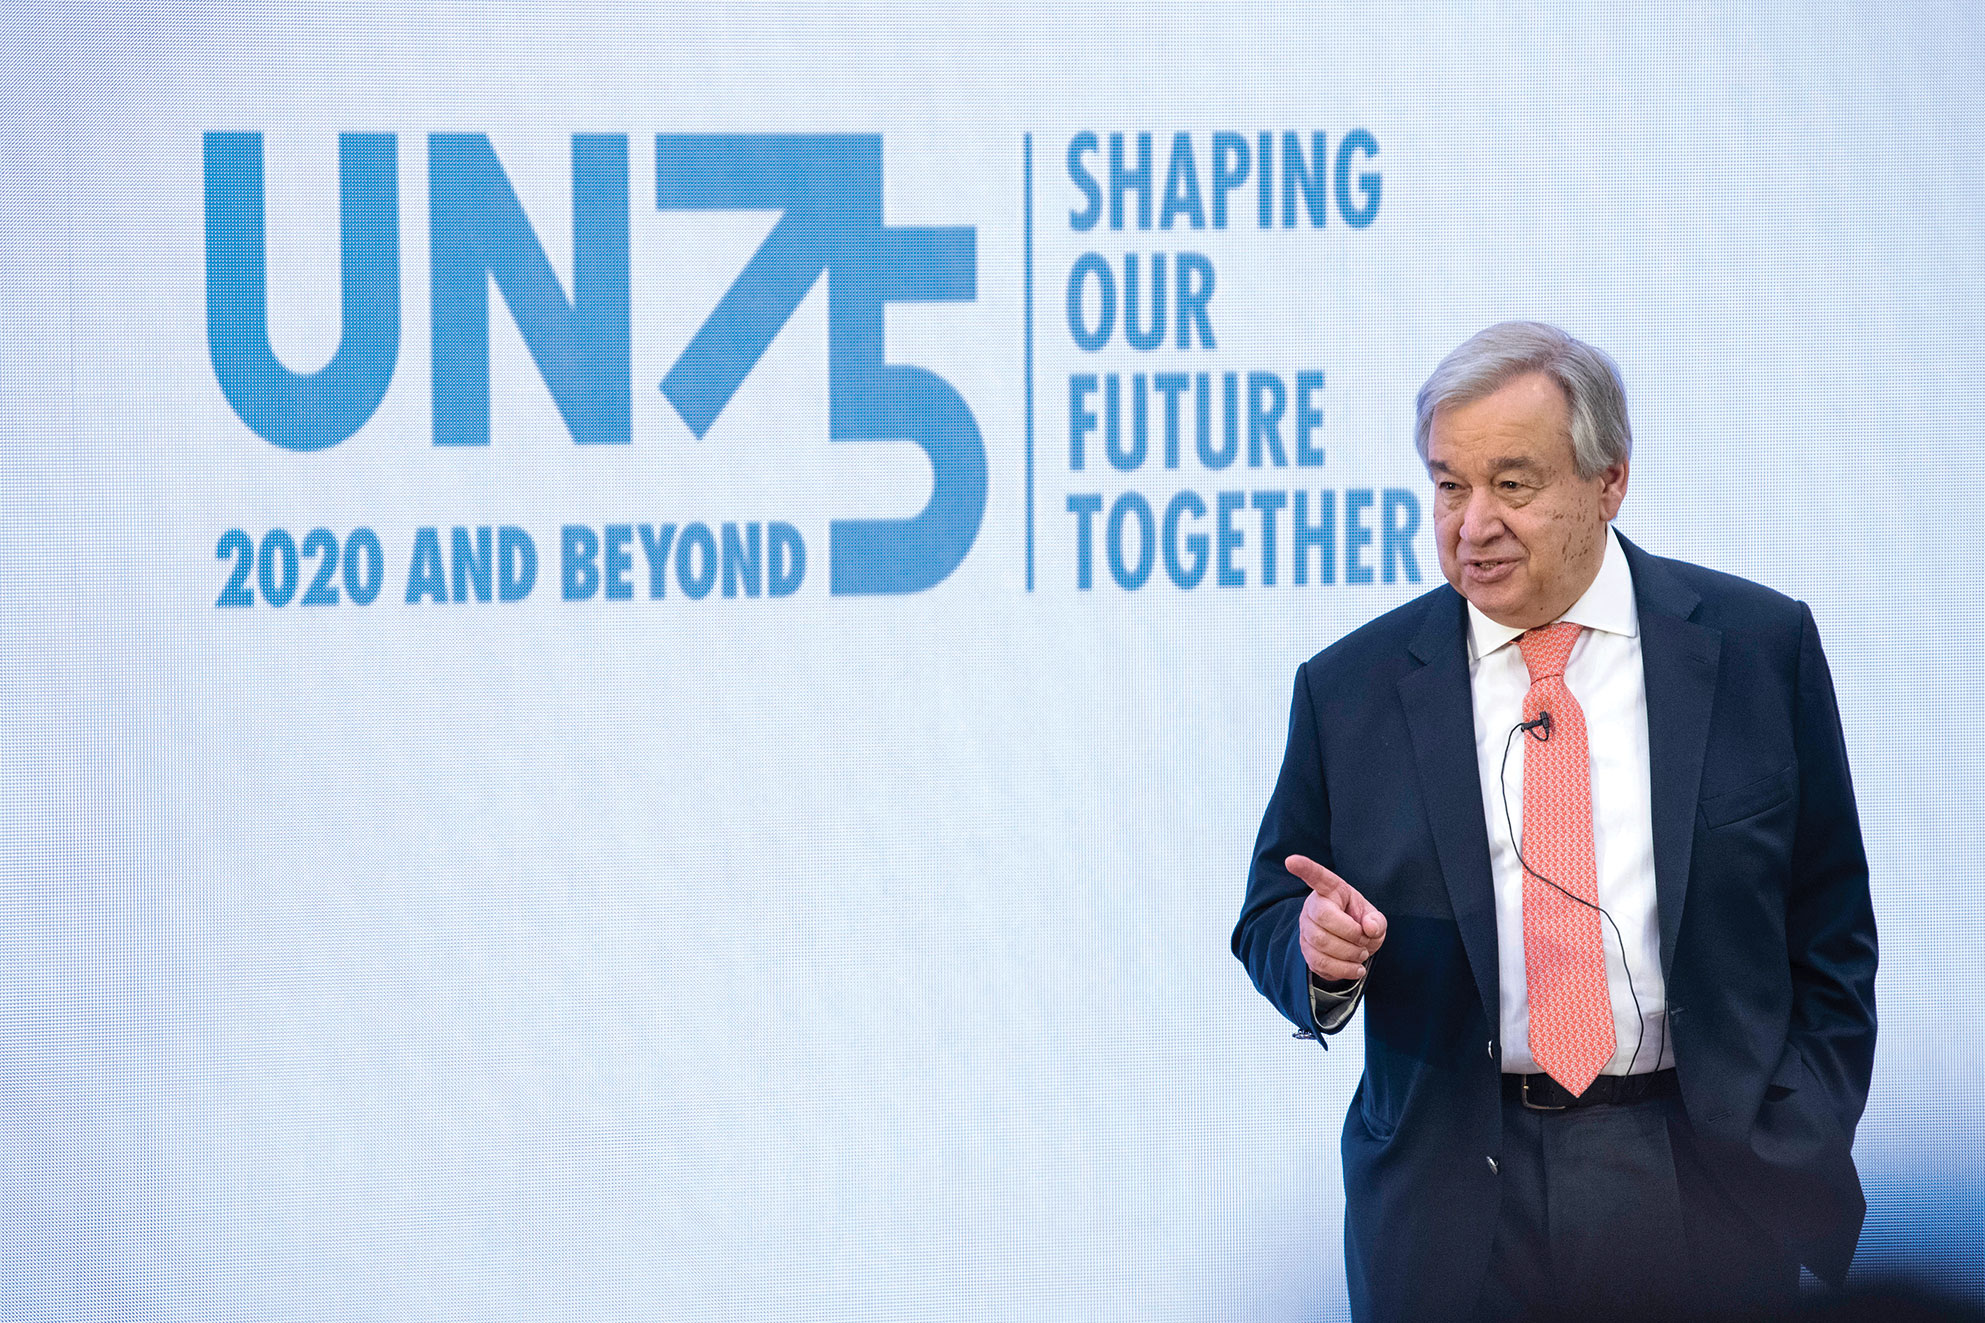 SG Guterres standing in front of sign: UN75 2020 AND BEYOND - SHAPING OUR FUTURE TOGETHER